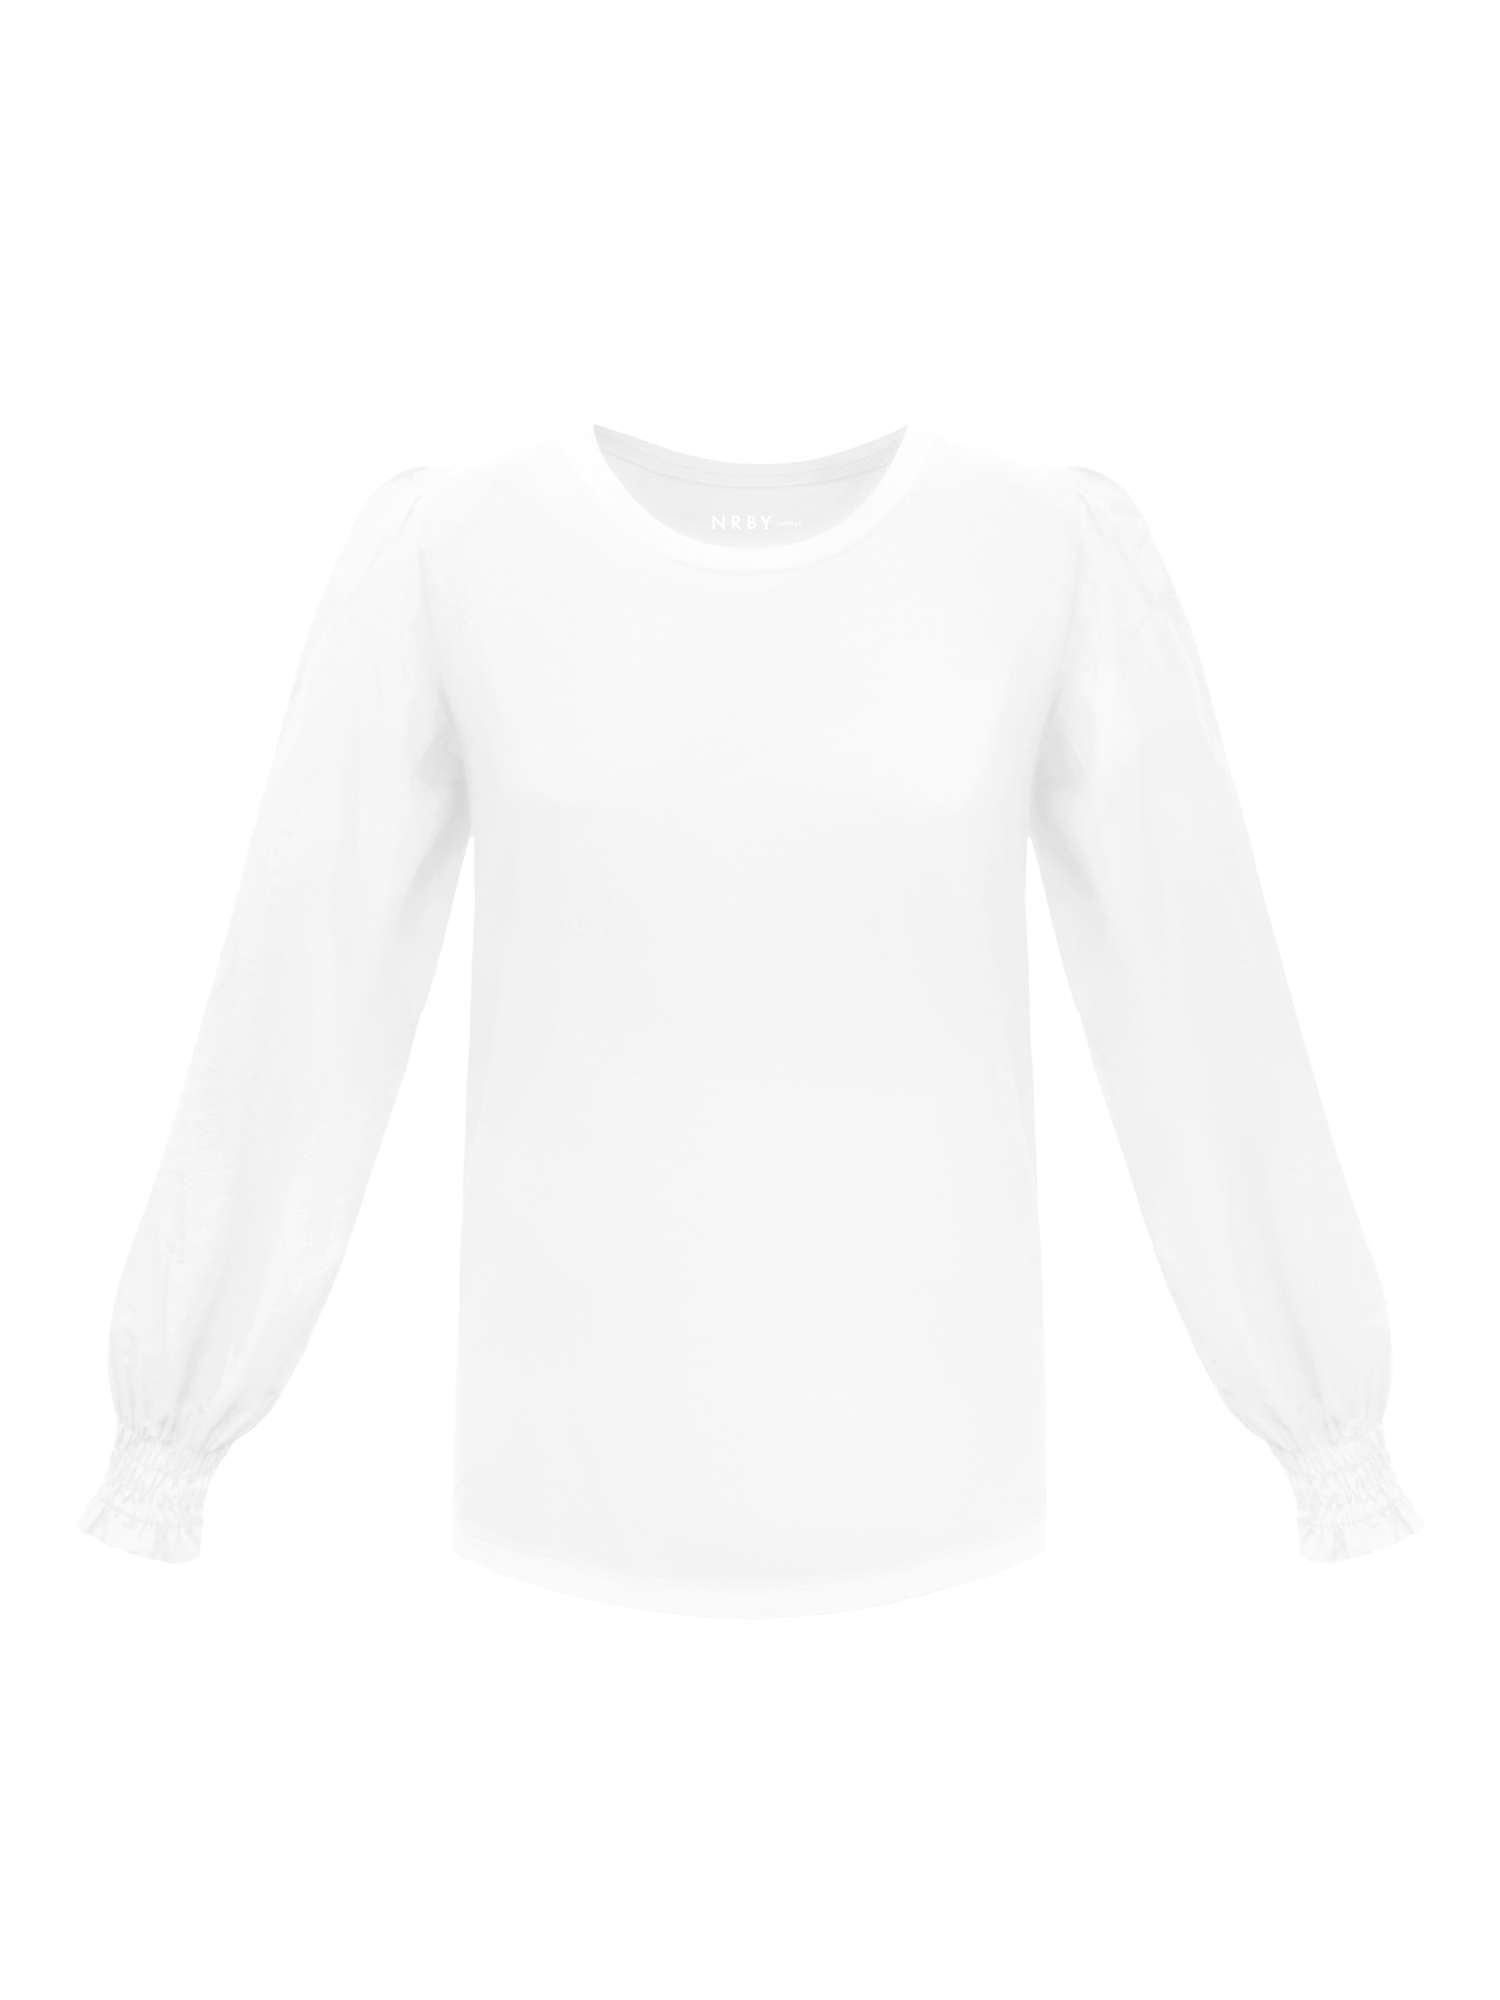 Buy NRBY Teddy Cotton Crew Neck Top Online at johnlewis.com